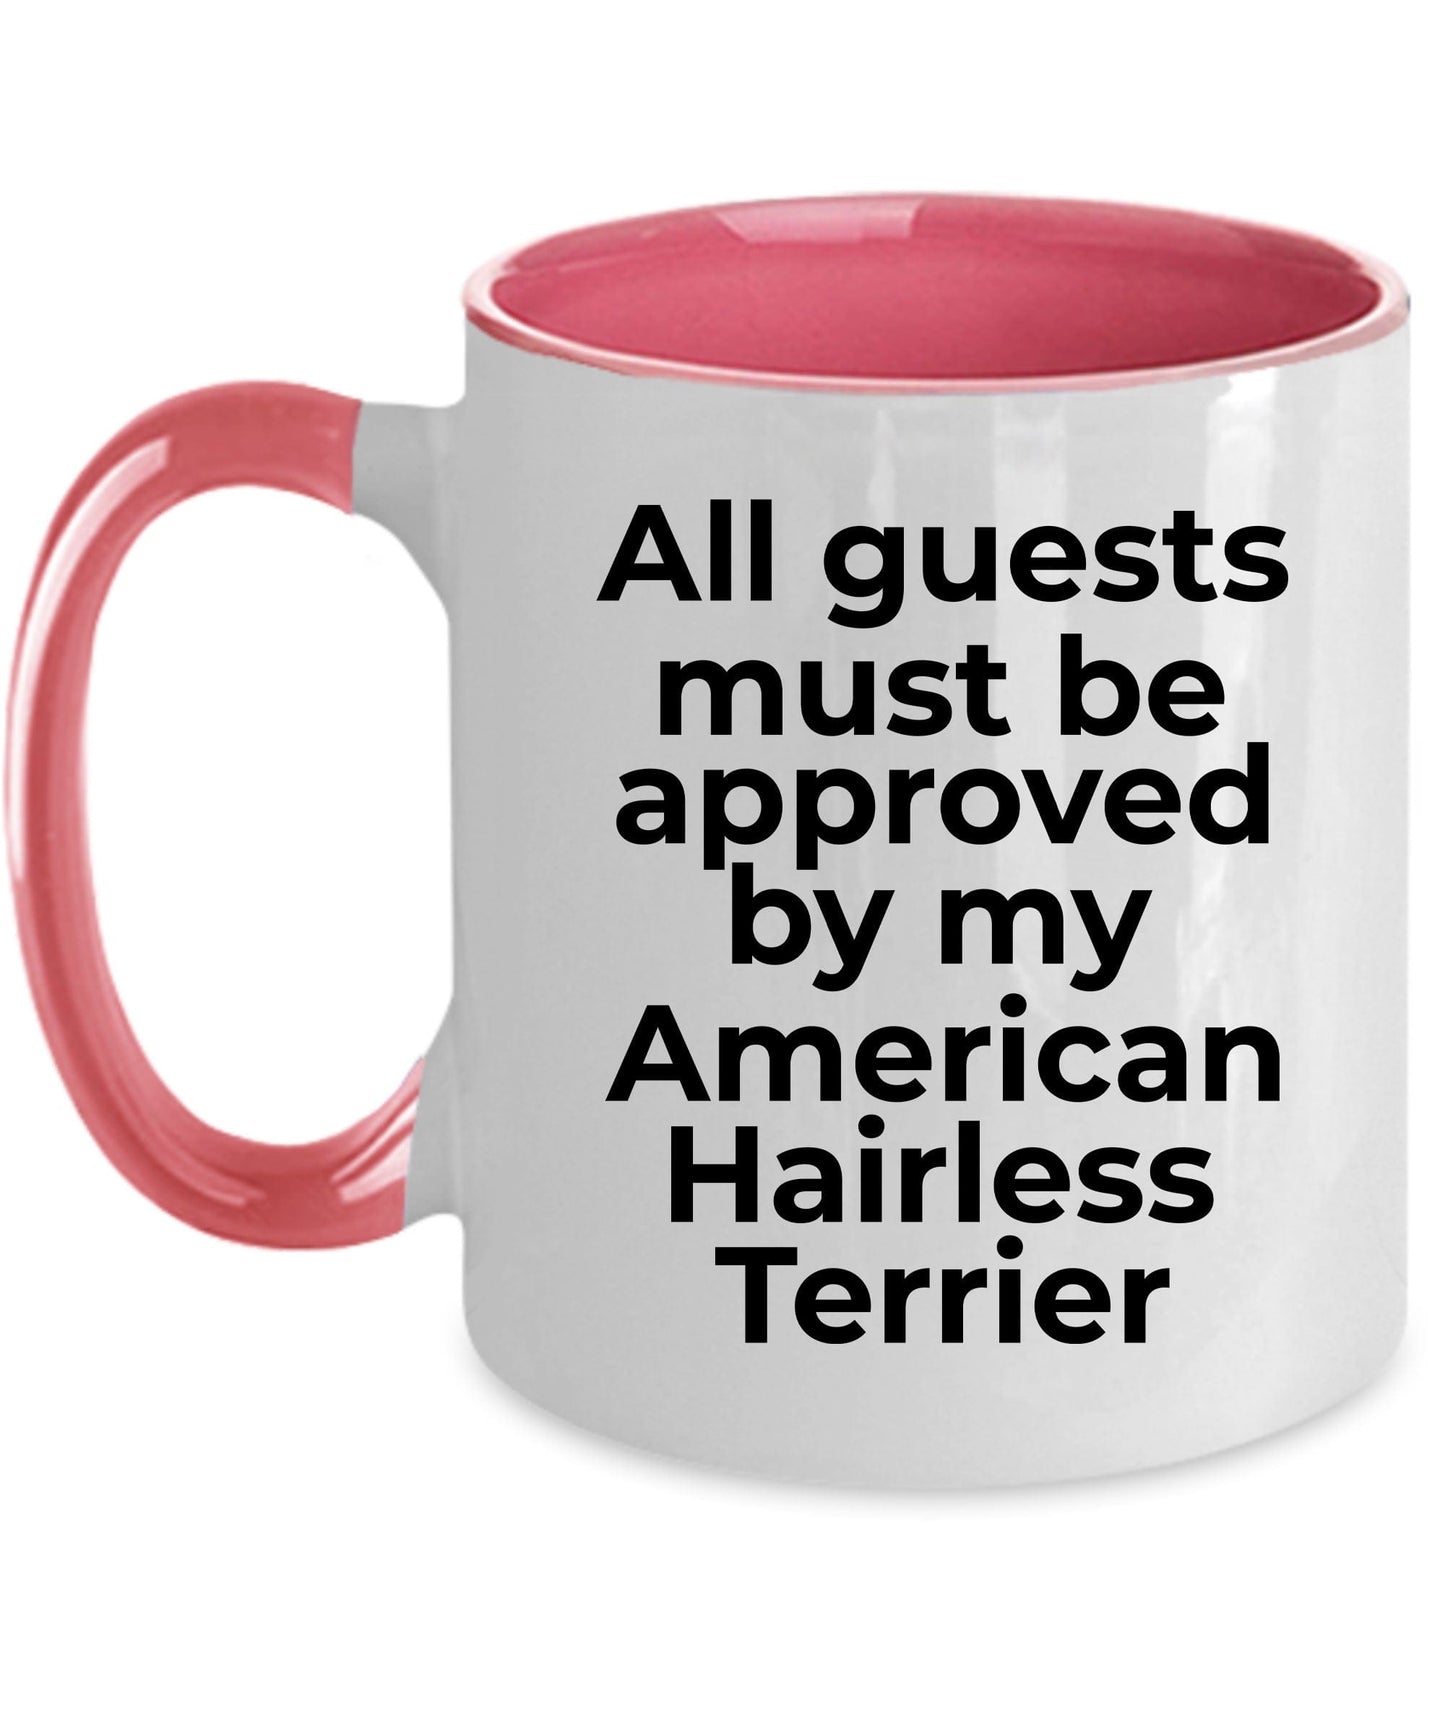 American Hairless Terrier Funny Dog Coffee Mug - Guests must be approved by my American Hairless Terrier